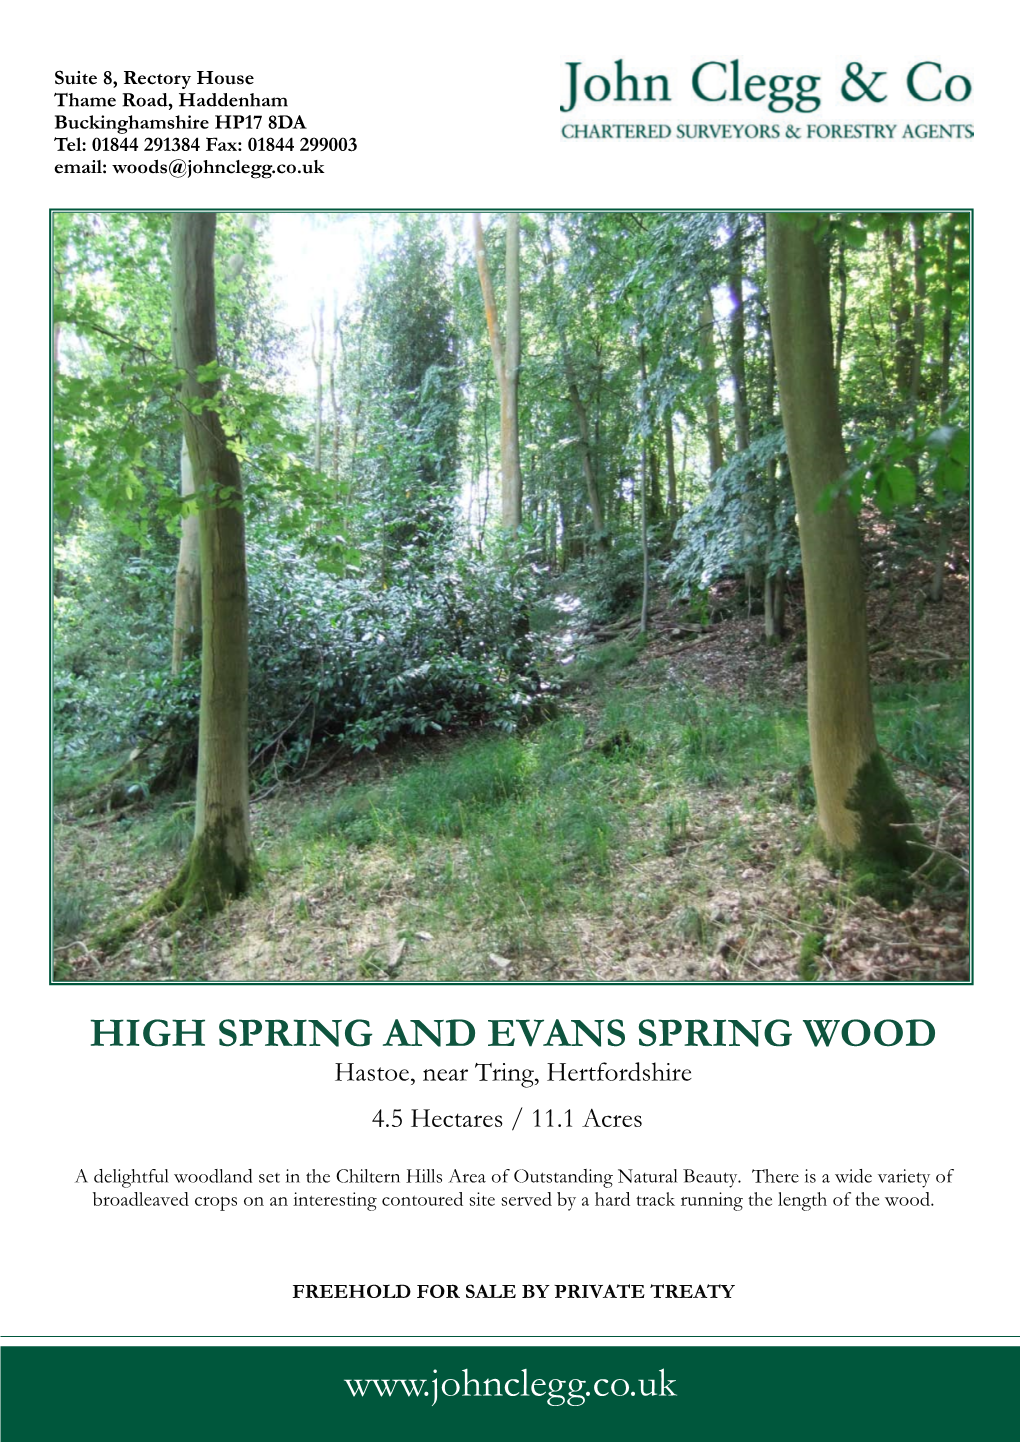 HIGH SPRING and EVANS SPRING WOOD Hastoe, Near Tring, Hertfordshire 4.5 Hectares / 11.1 Acres